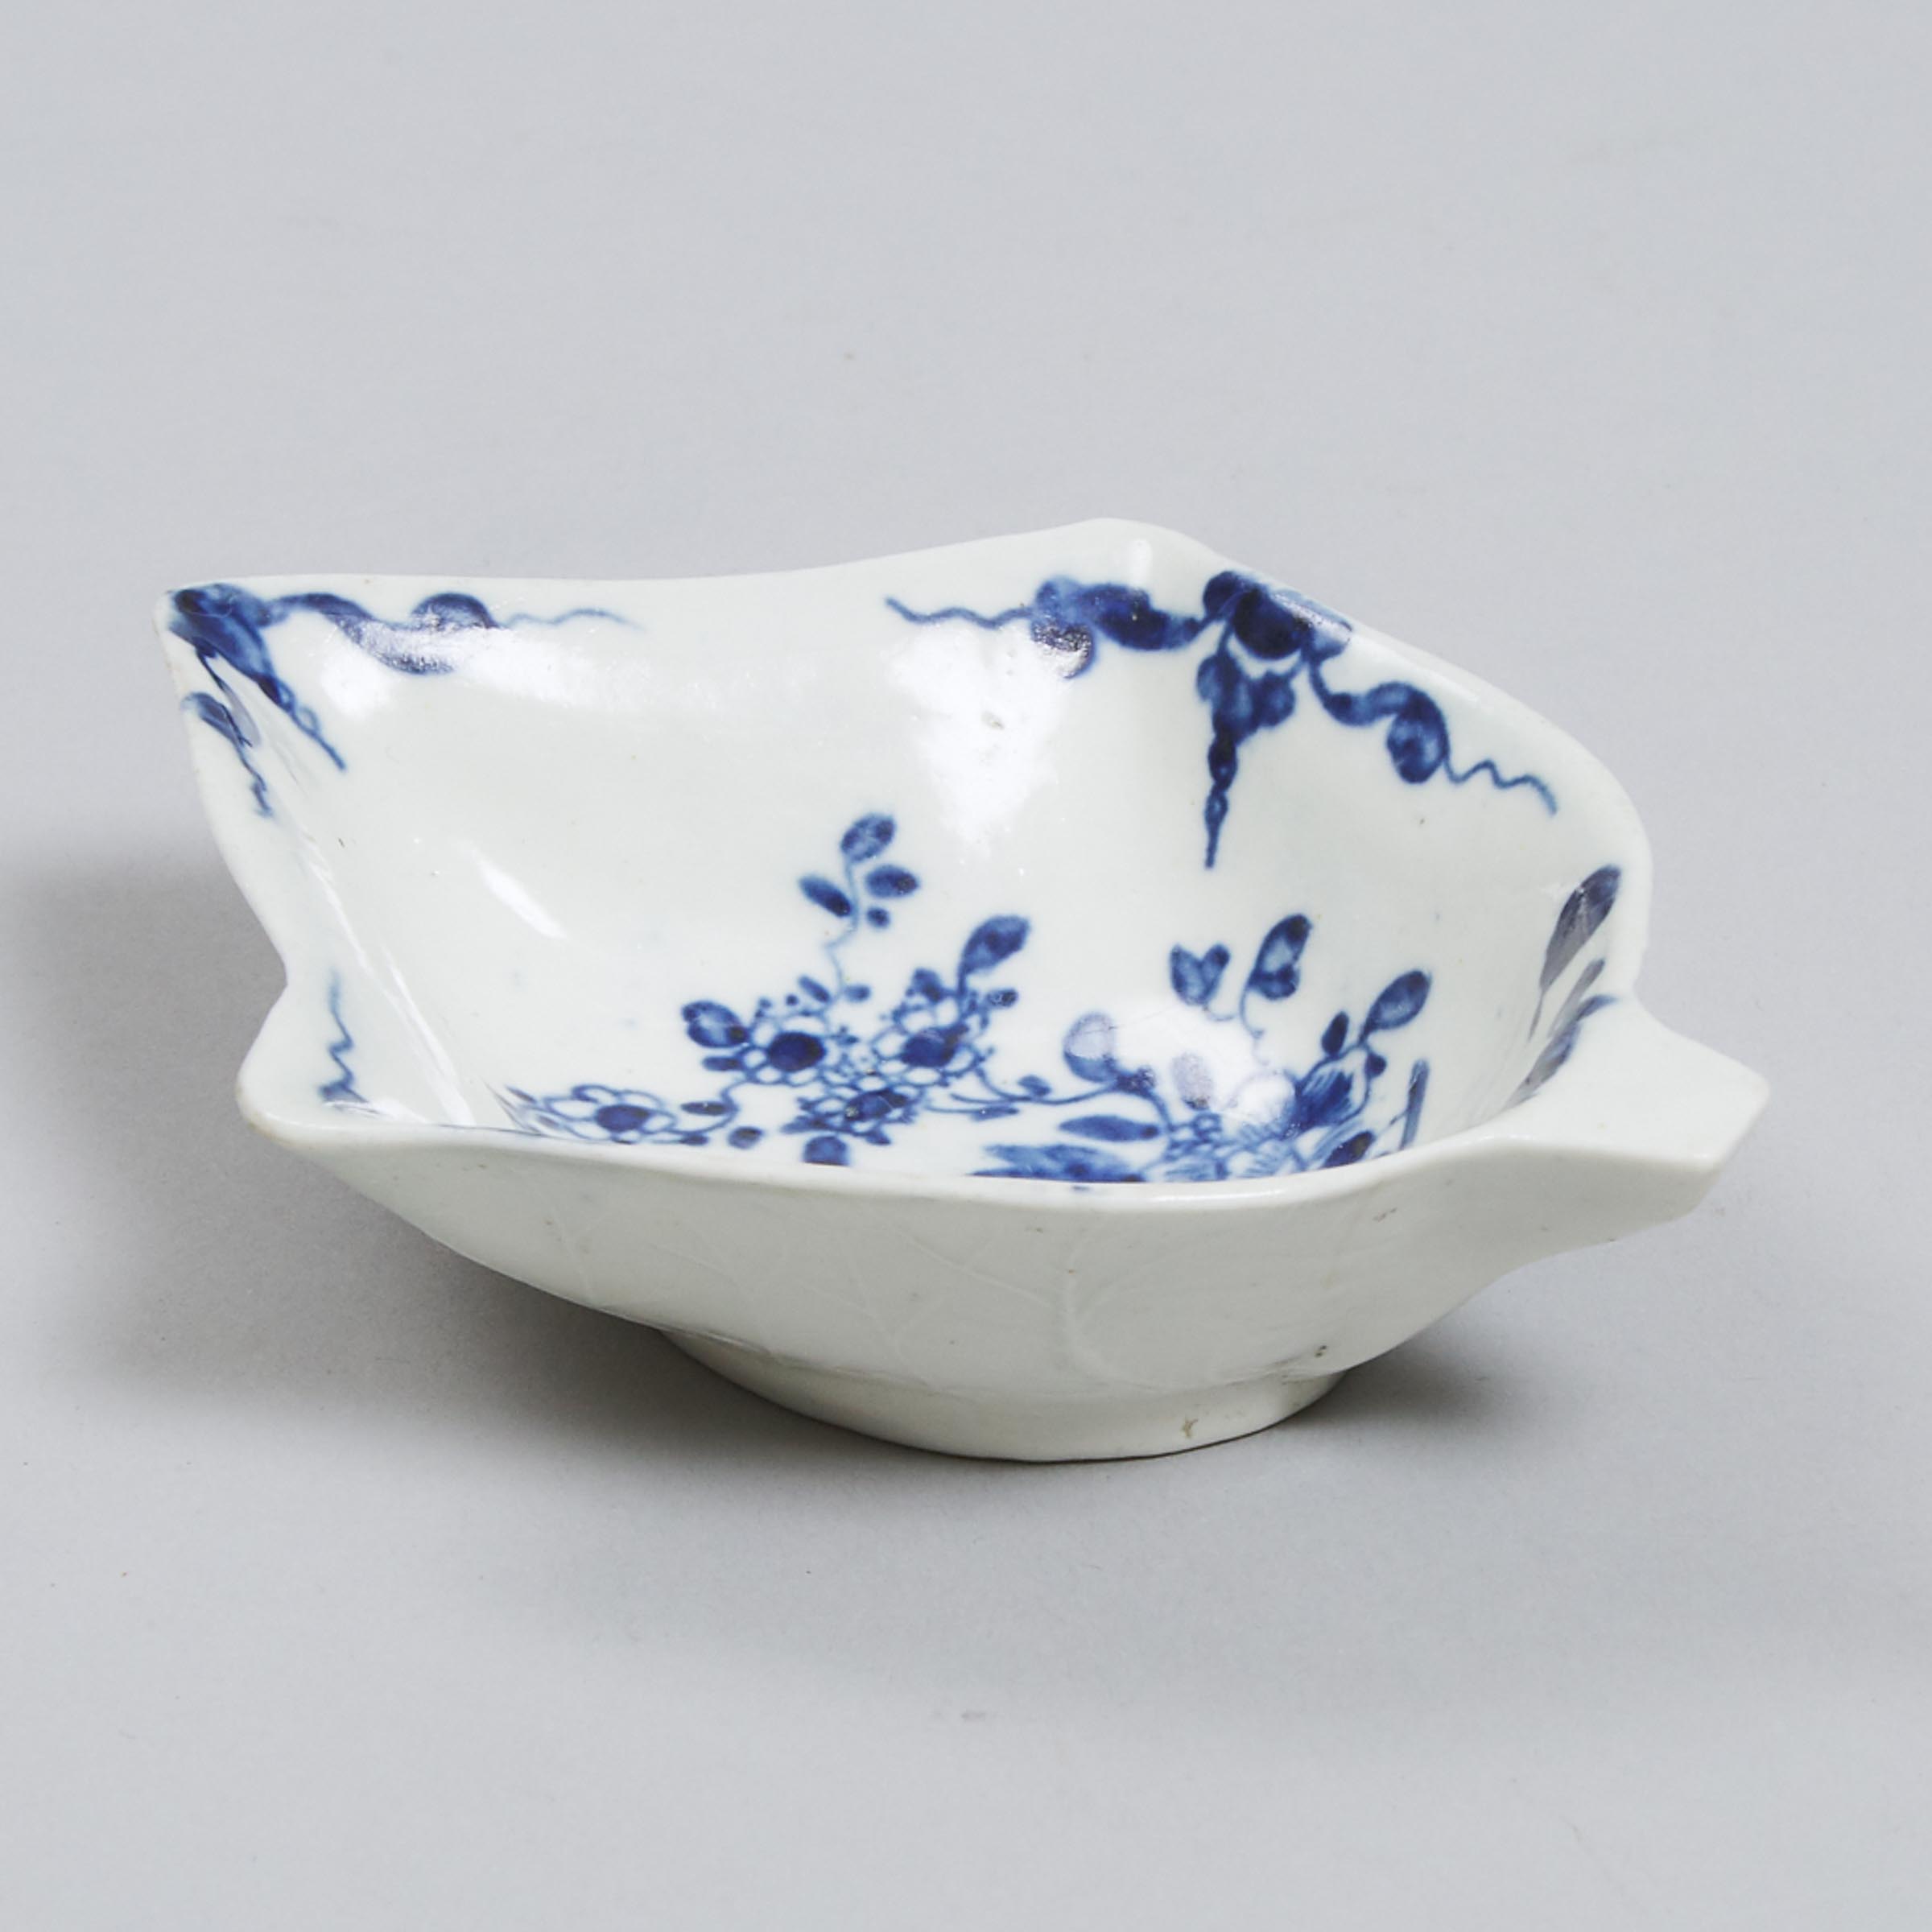 Worcester 'Two-Peony Rock Bird' Ivy Leaf Pickle Dish, c.1758-60